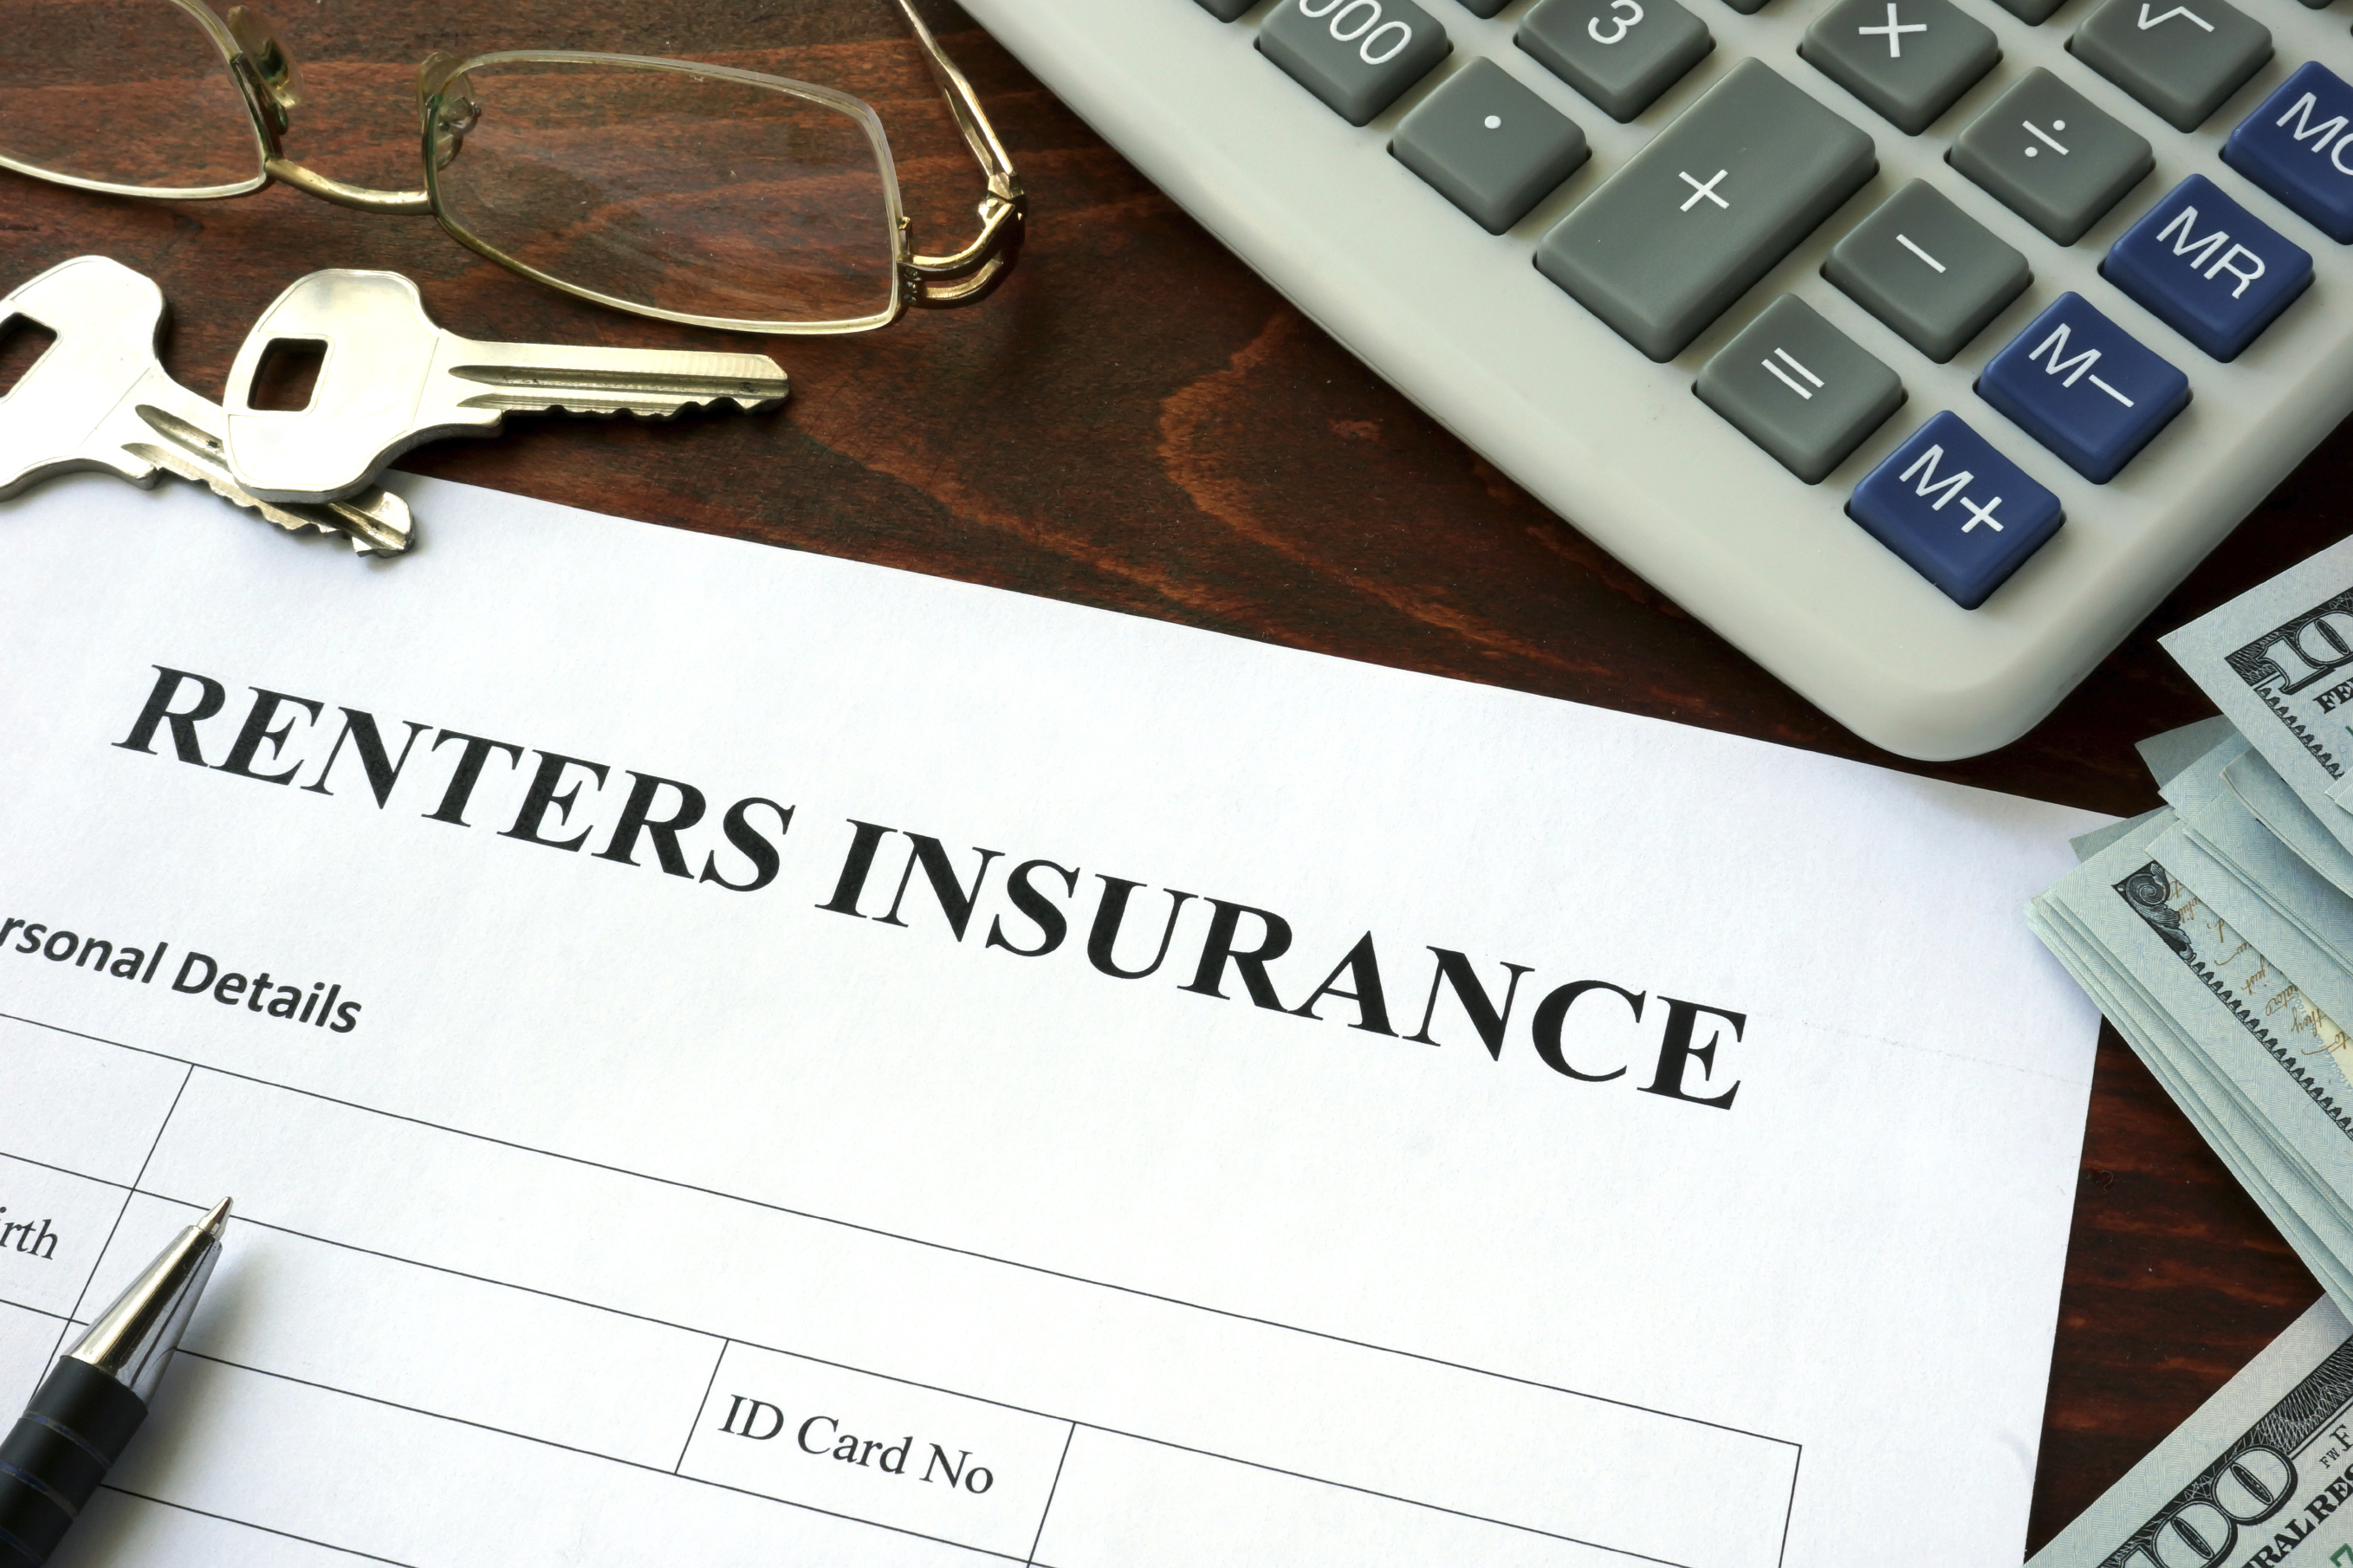 Don't Want to Buy Renters Insurance? You Might Not Have a